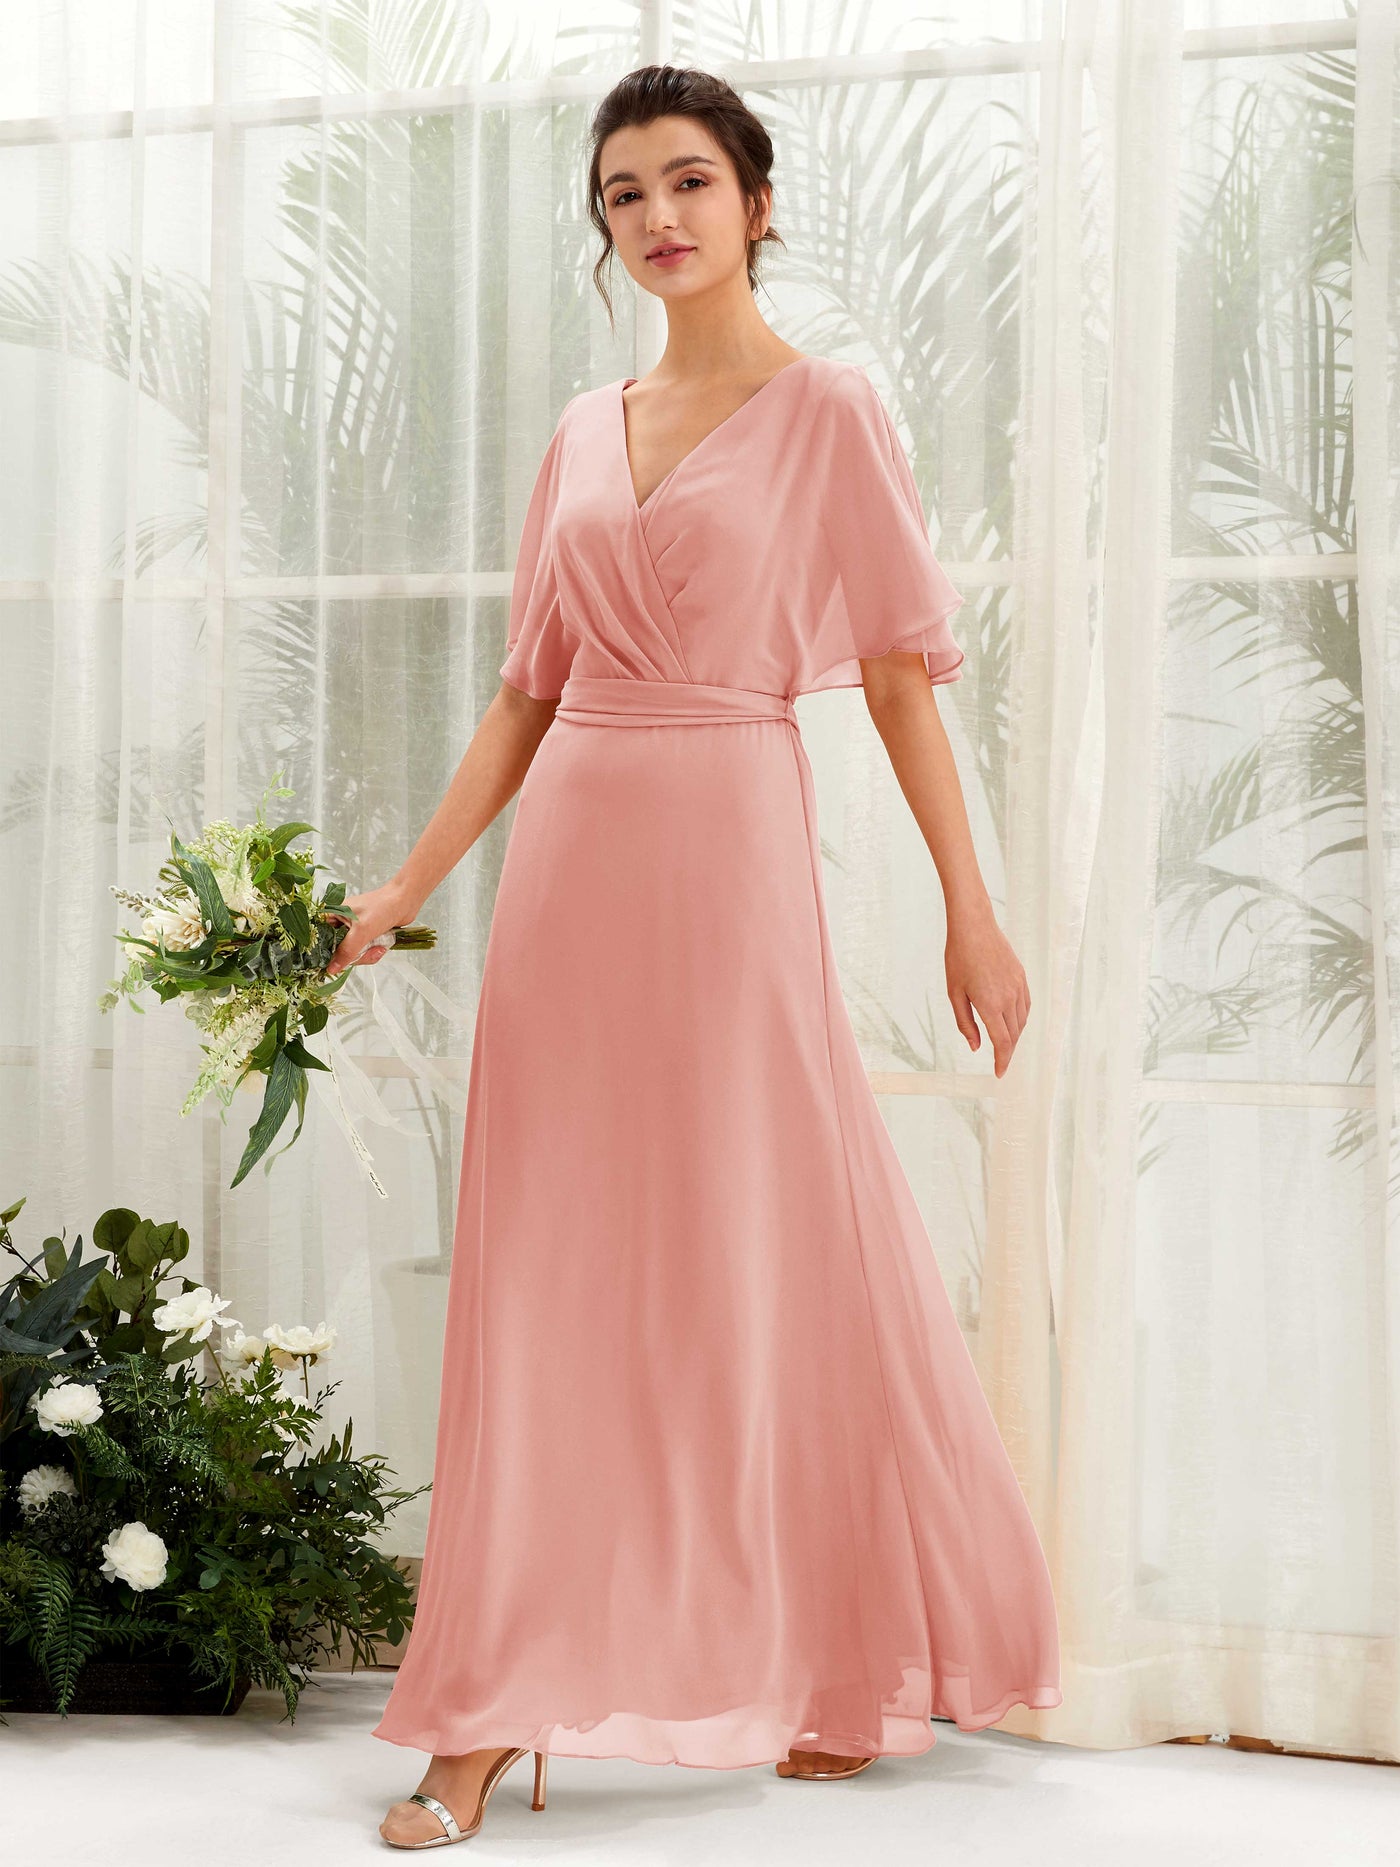 Champagne Rose Bridesmaid Dresses Bridesmaid Dress A-line Chiffon V-neck Full Length Short Sleeves Wedding Party Dress (81222406)#color_champagne-rose